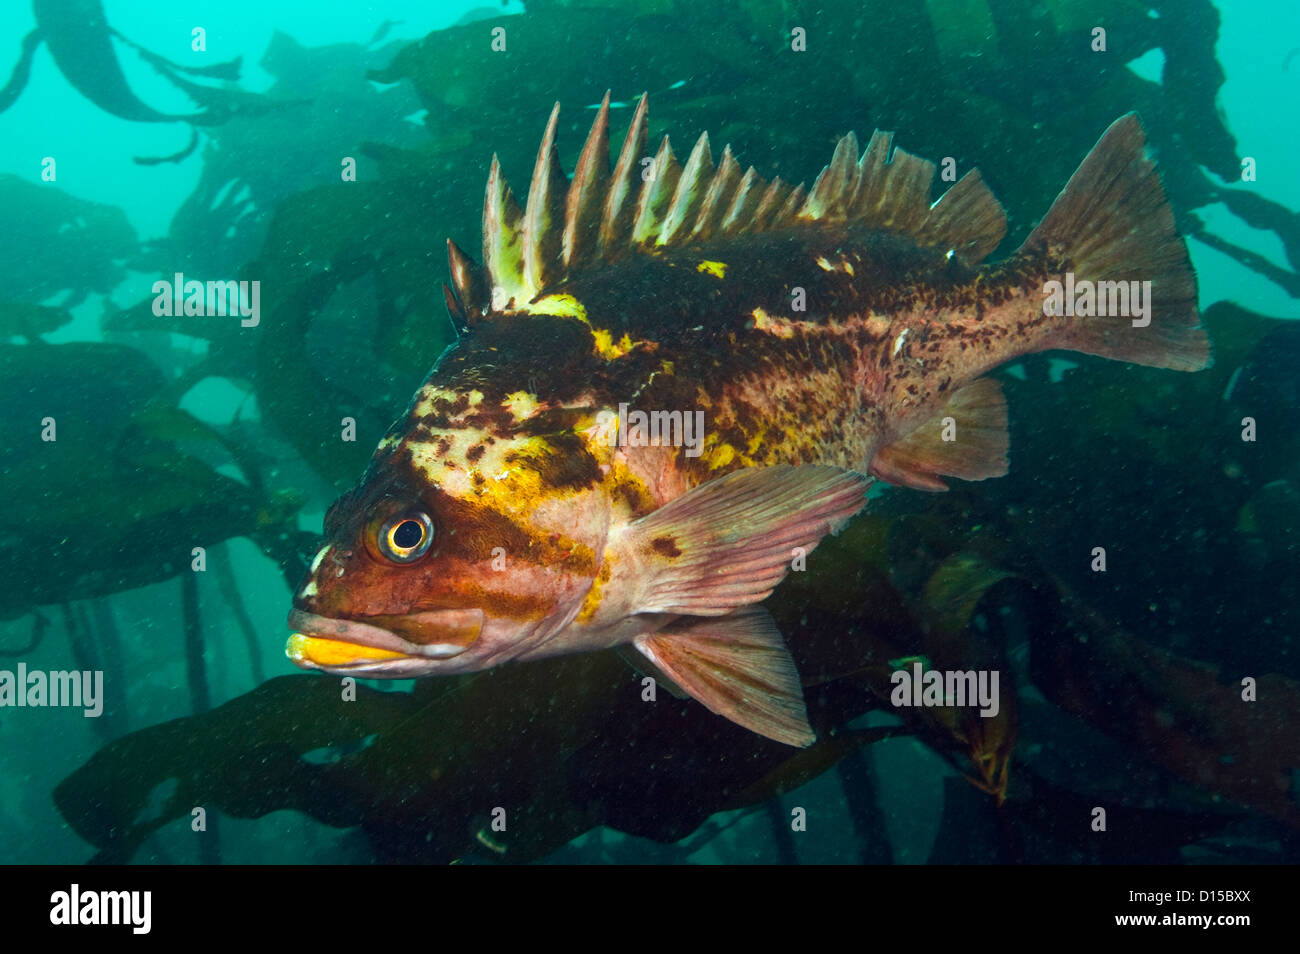 A Copper Rockfish, Sebastes caurinus, hides among the kelp of Browning Passage in Vancouver Island, British Columbia, Canada Stock Photo